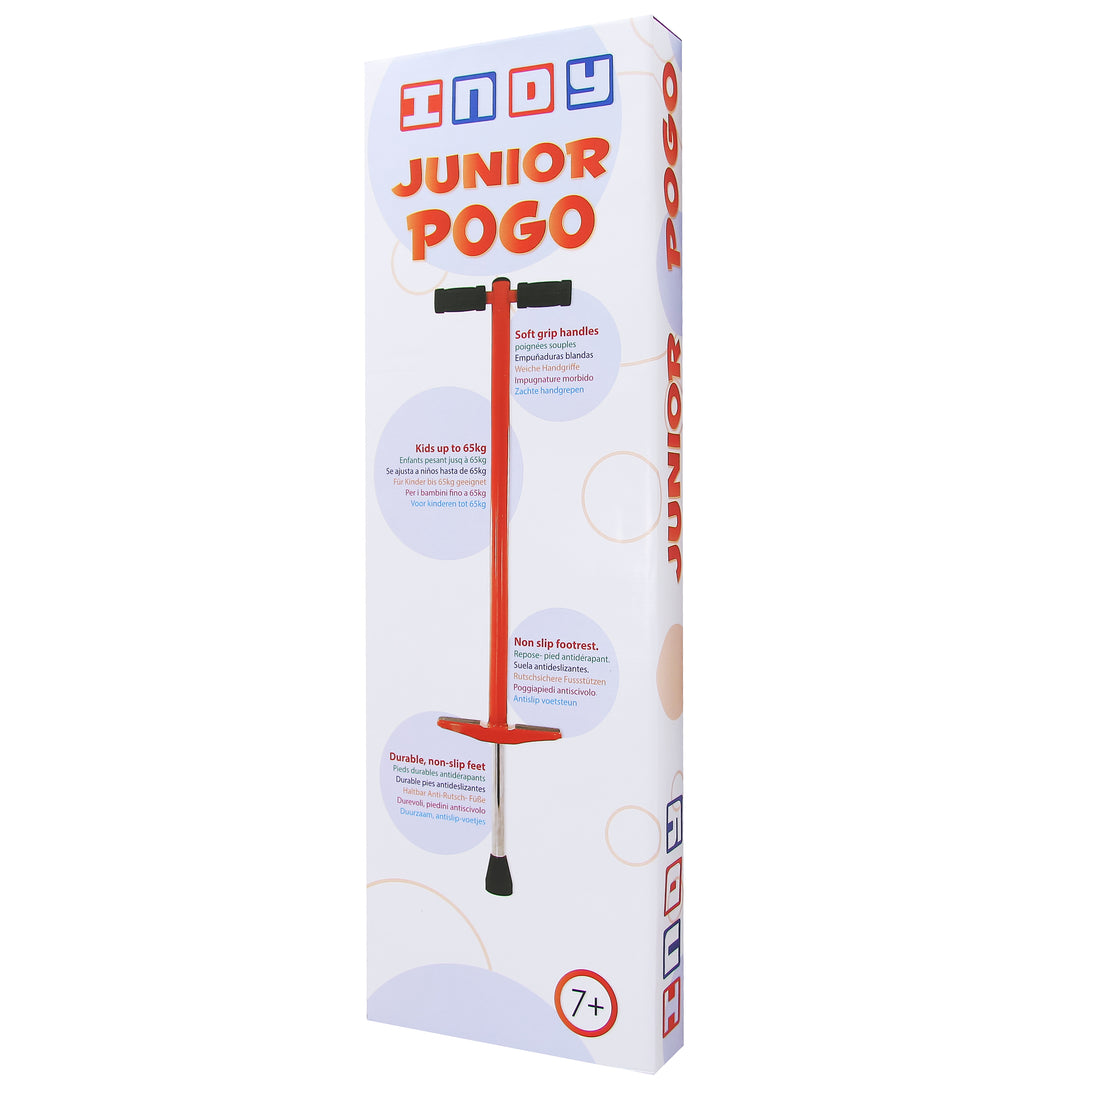 Indy Junior Pogo packaging box